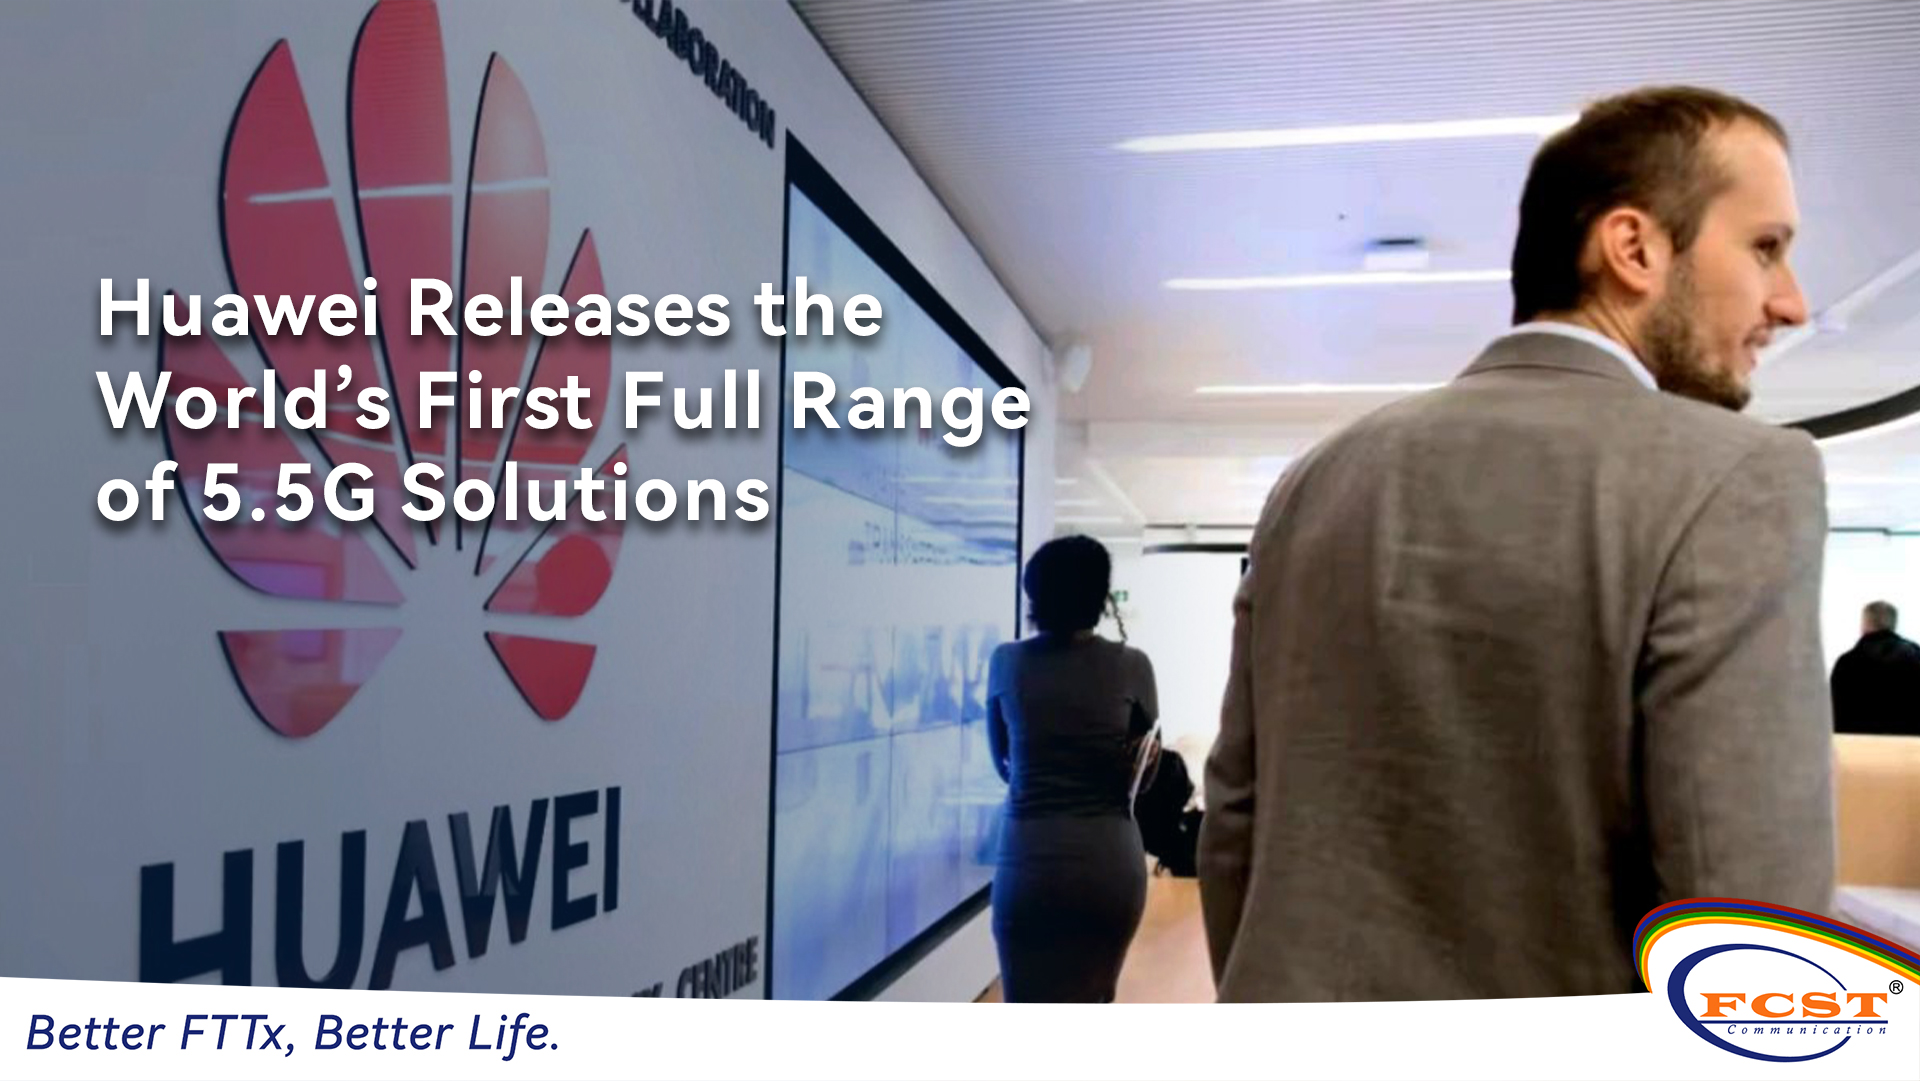 Huawei Releases the World’s First Full Range of 5.5G Solutions